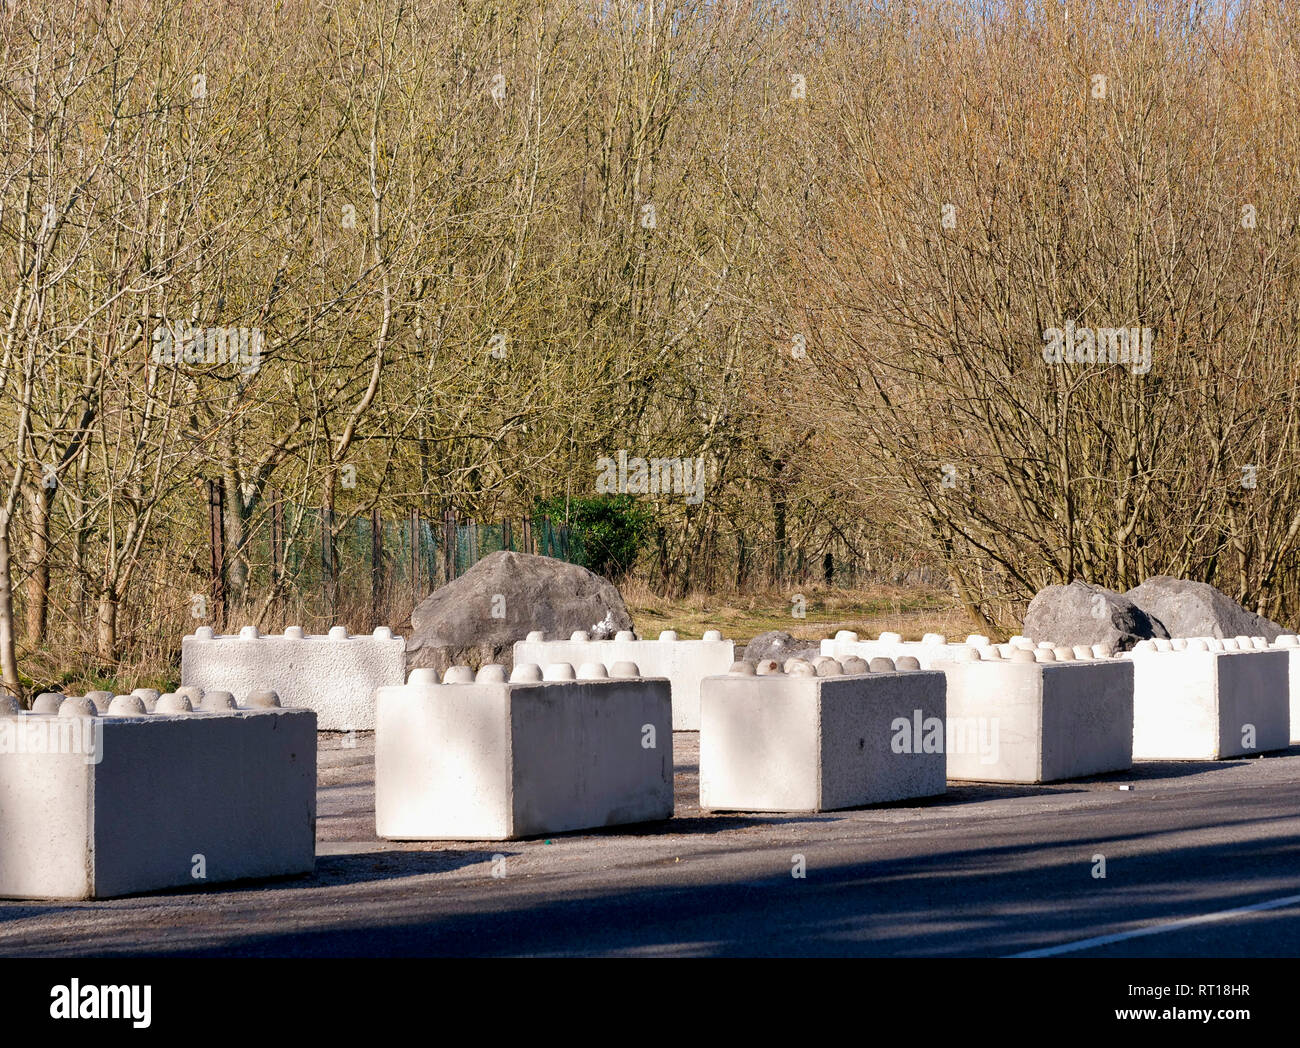 Wirksworth, Derbyshire Dales, UK. 27th Feb 2019. Concrete blocks placed on the carpark to protect Wirksworth beauty spot owned by Wirksworth Town Council (Labour) after Derbyshire Dales District Council (Conservative) voted on relocating a GRT Travellers camp on disputed land adjacent to Stoney Wood, Wirksworth, Derbyshire Dales. Wirksworth Town Council are seeking legal advise to try & protect the trees, rare wild orchids & other wildlife in and around this Sight of Special scientific Interest. Credit: Doug Blane/Alamy Live News Stock Photo